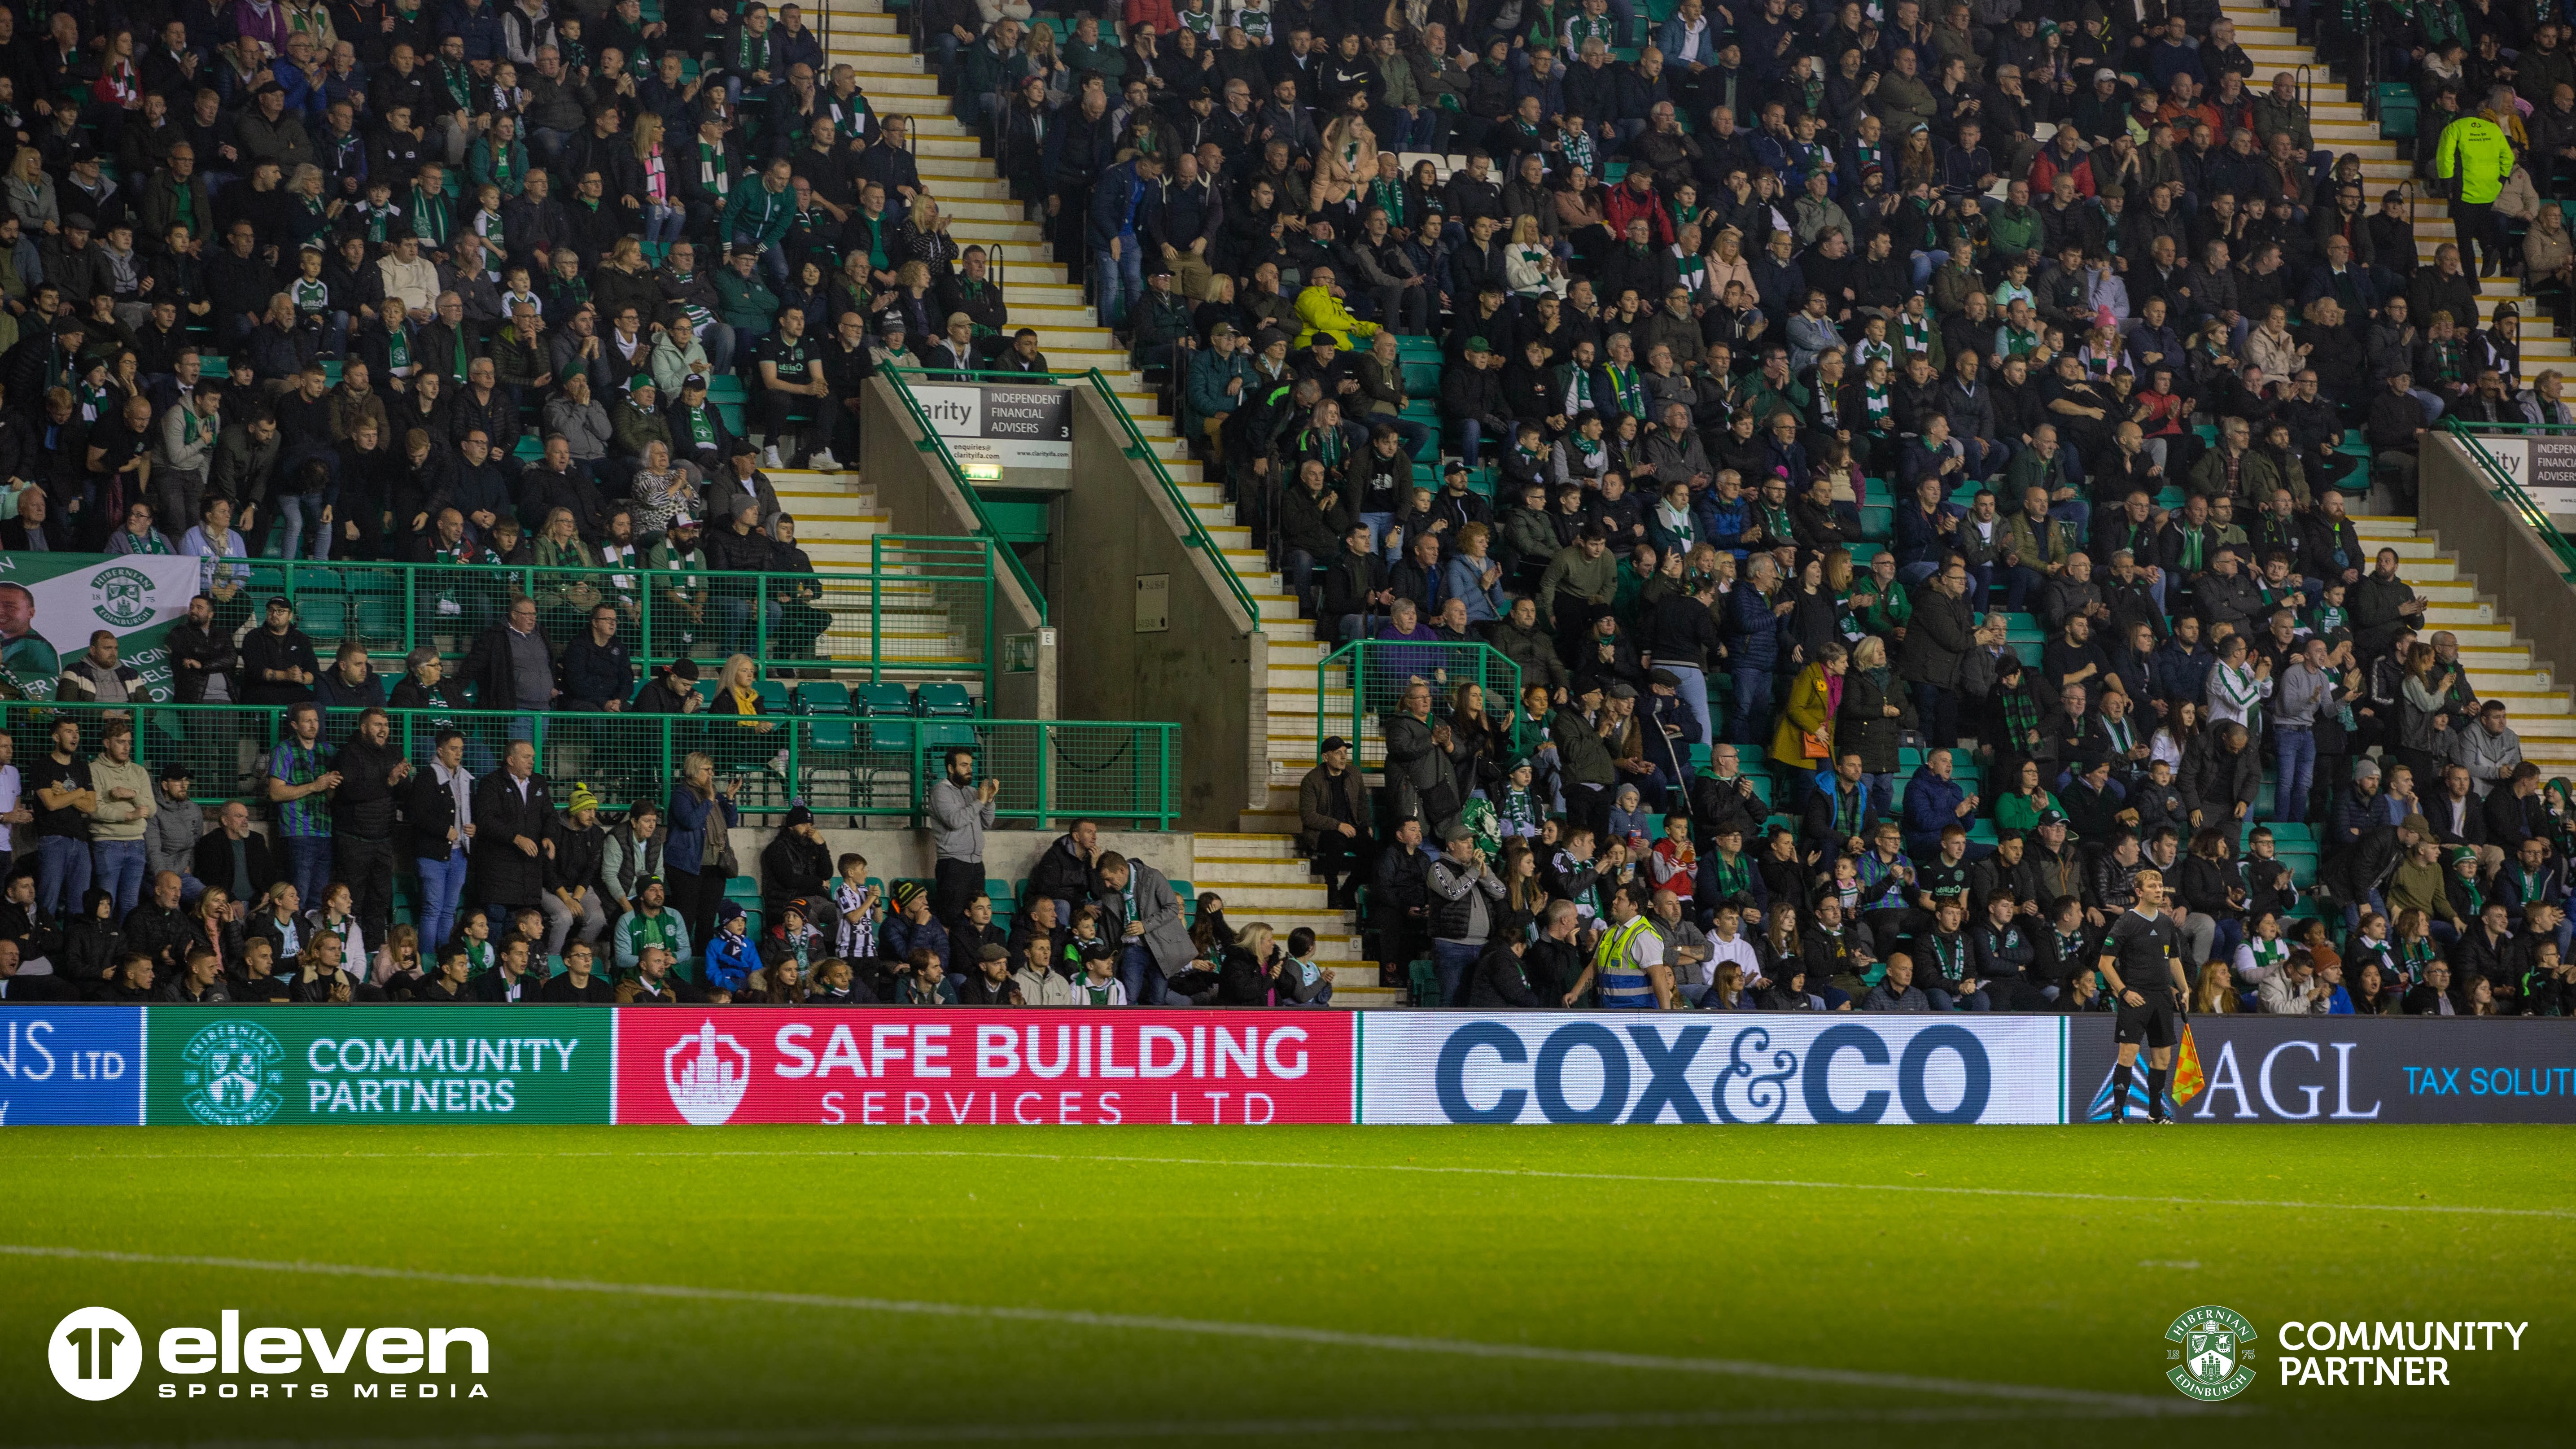 Cox & Co branding seen on the LED boards at Hibs' Easter Road Stadium